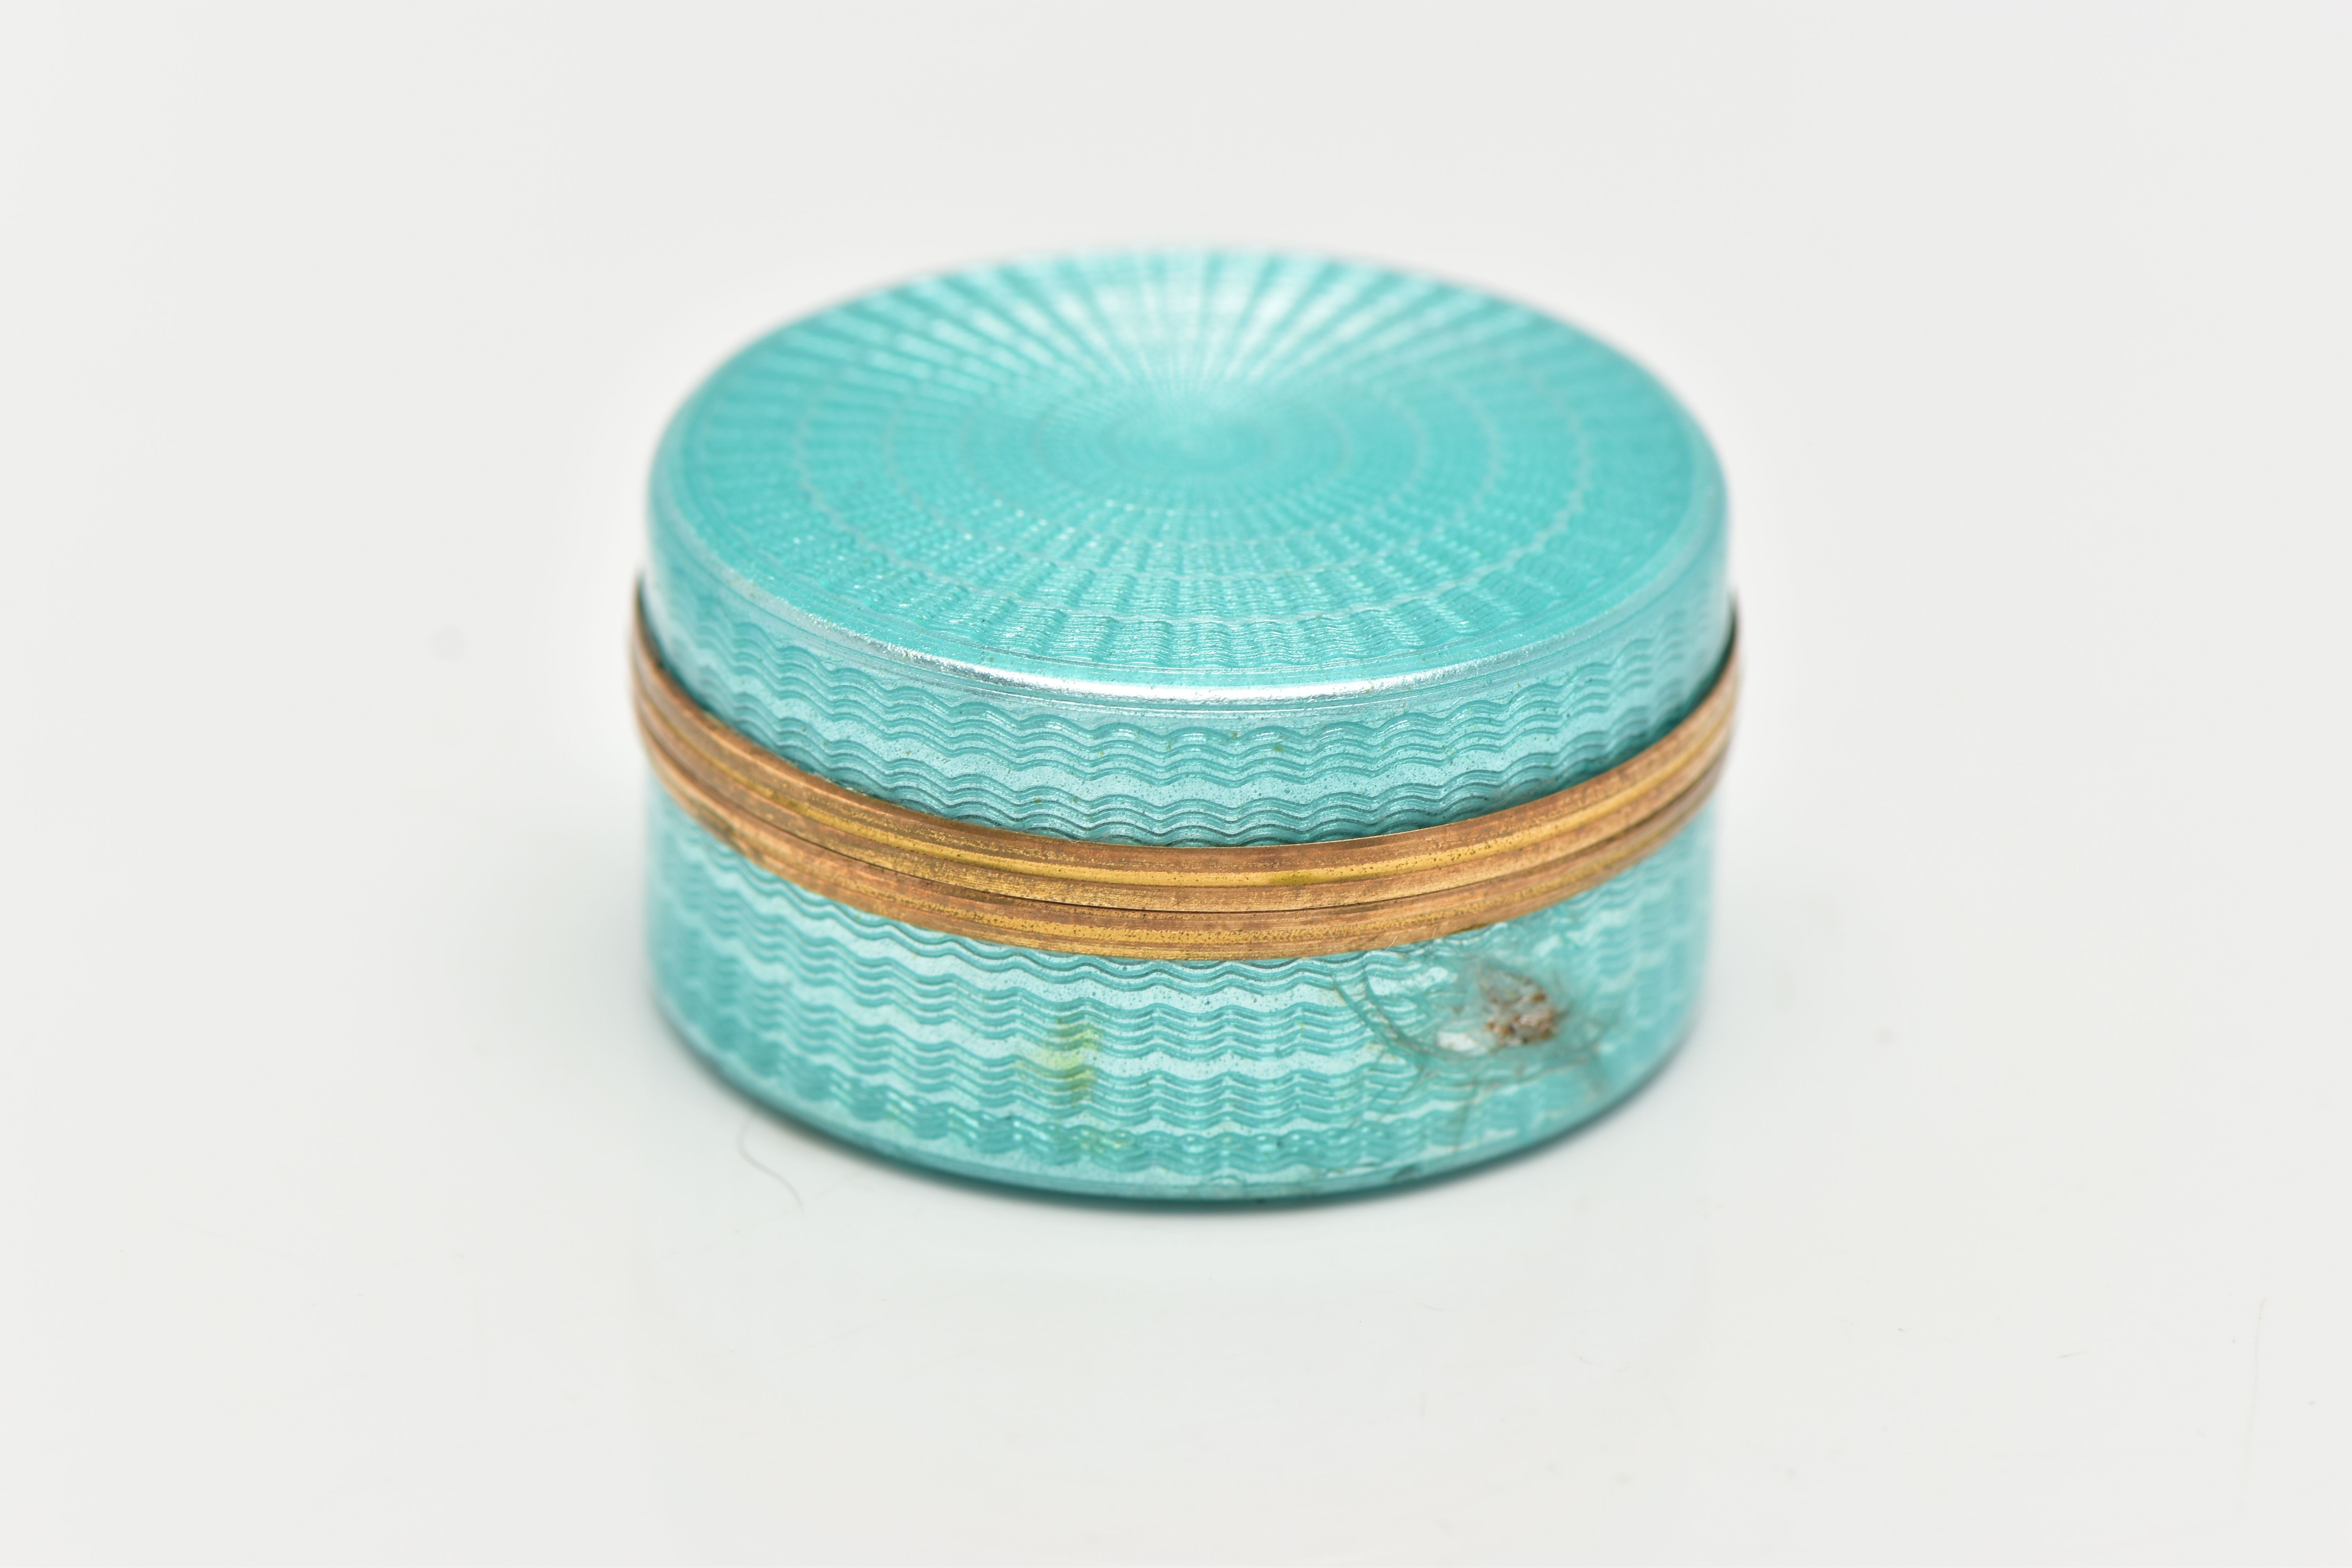 A ROUND GUILLOCHE ENAMEL TRINKET BOX, small circular box decorated with a teal guilloche enamel,